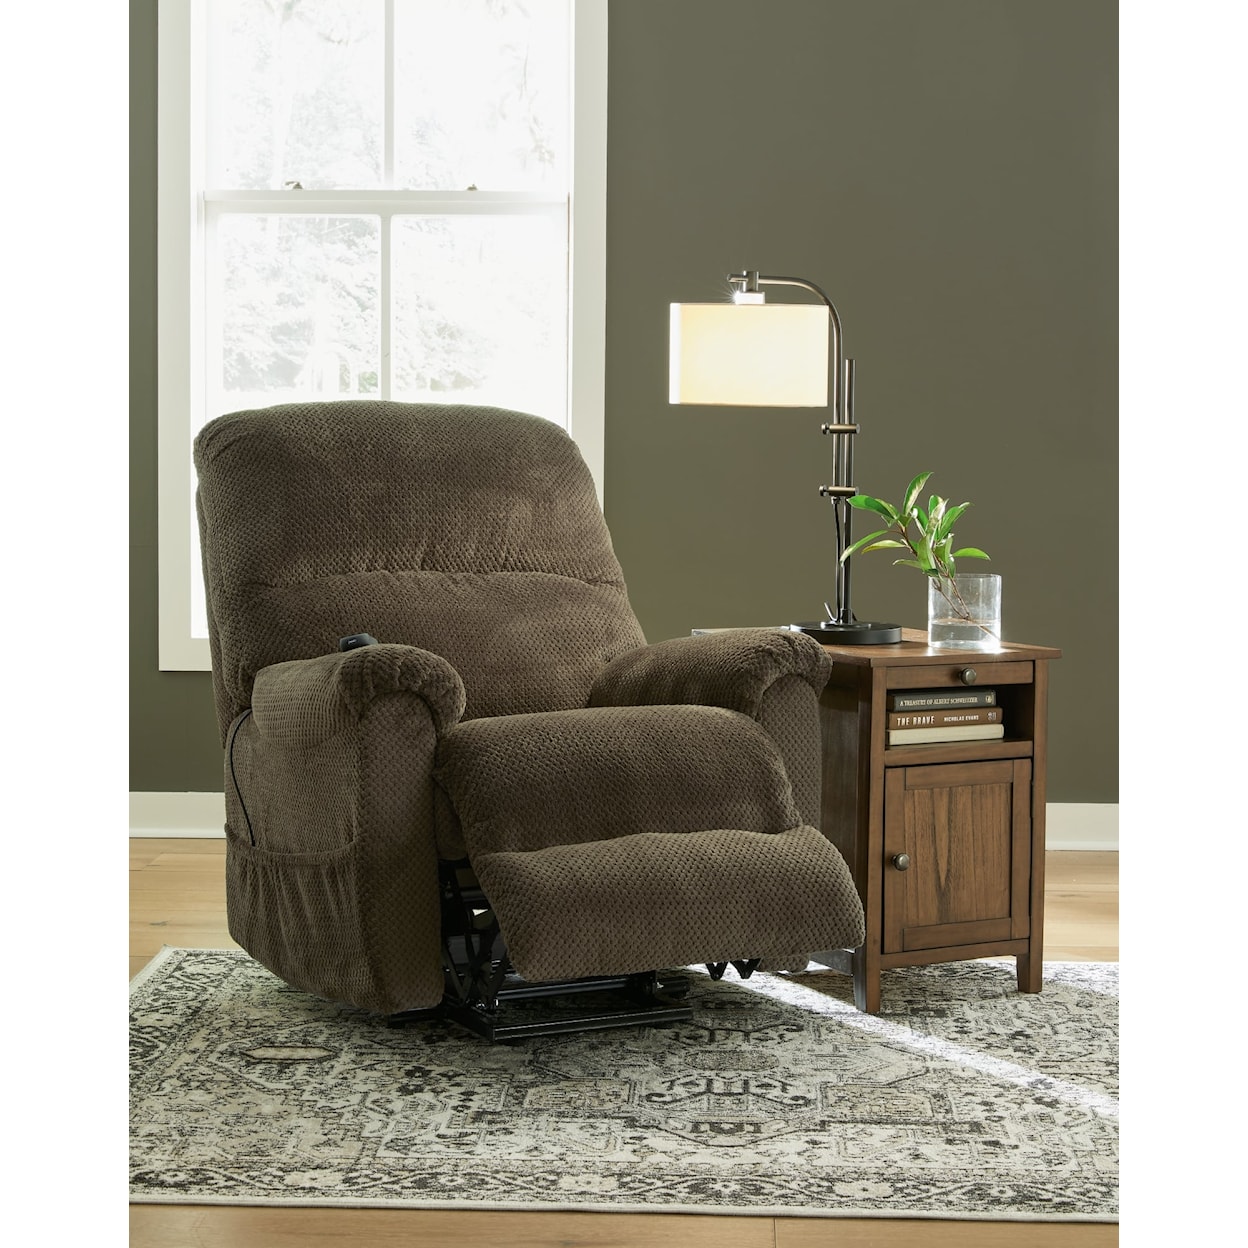 Signature Design by Ashley Shadowboxer Power Lift Recliner